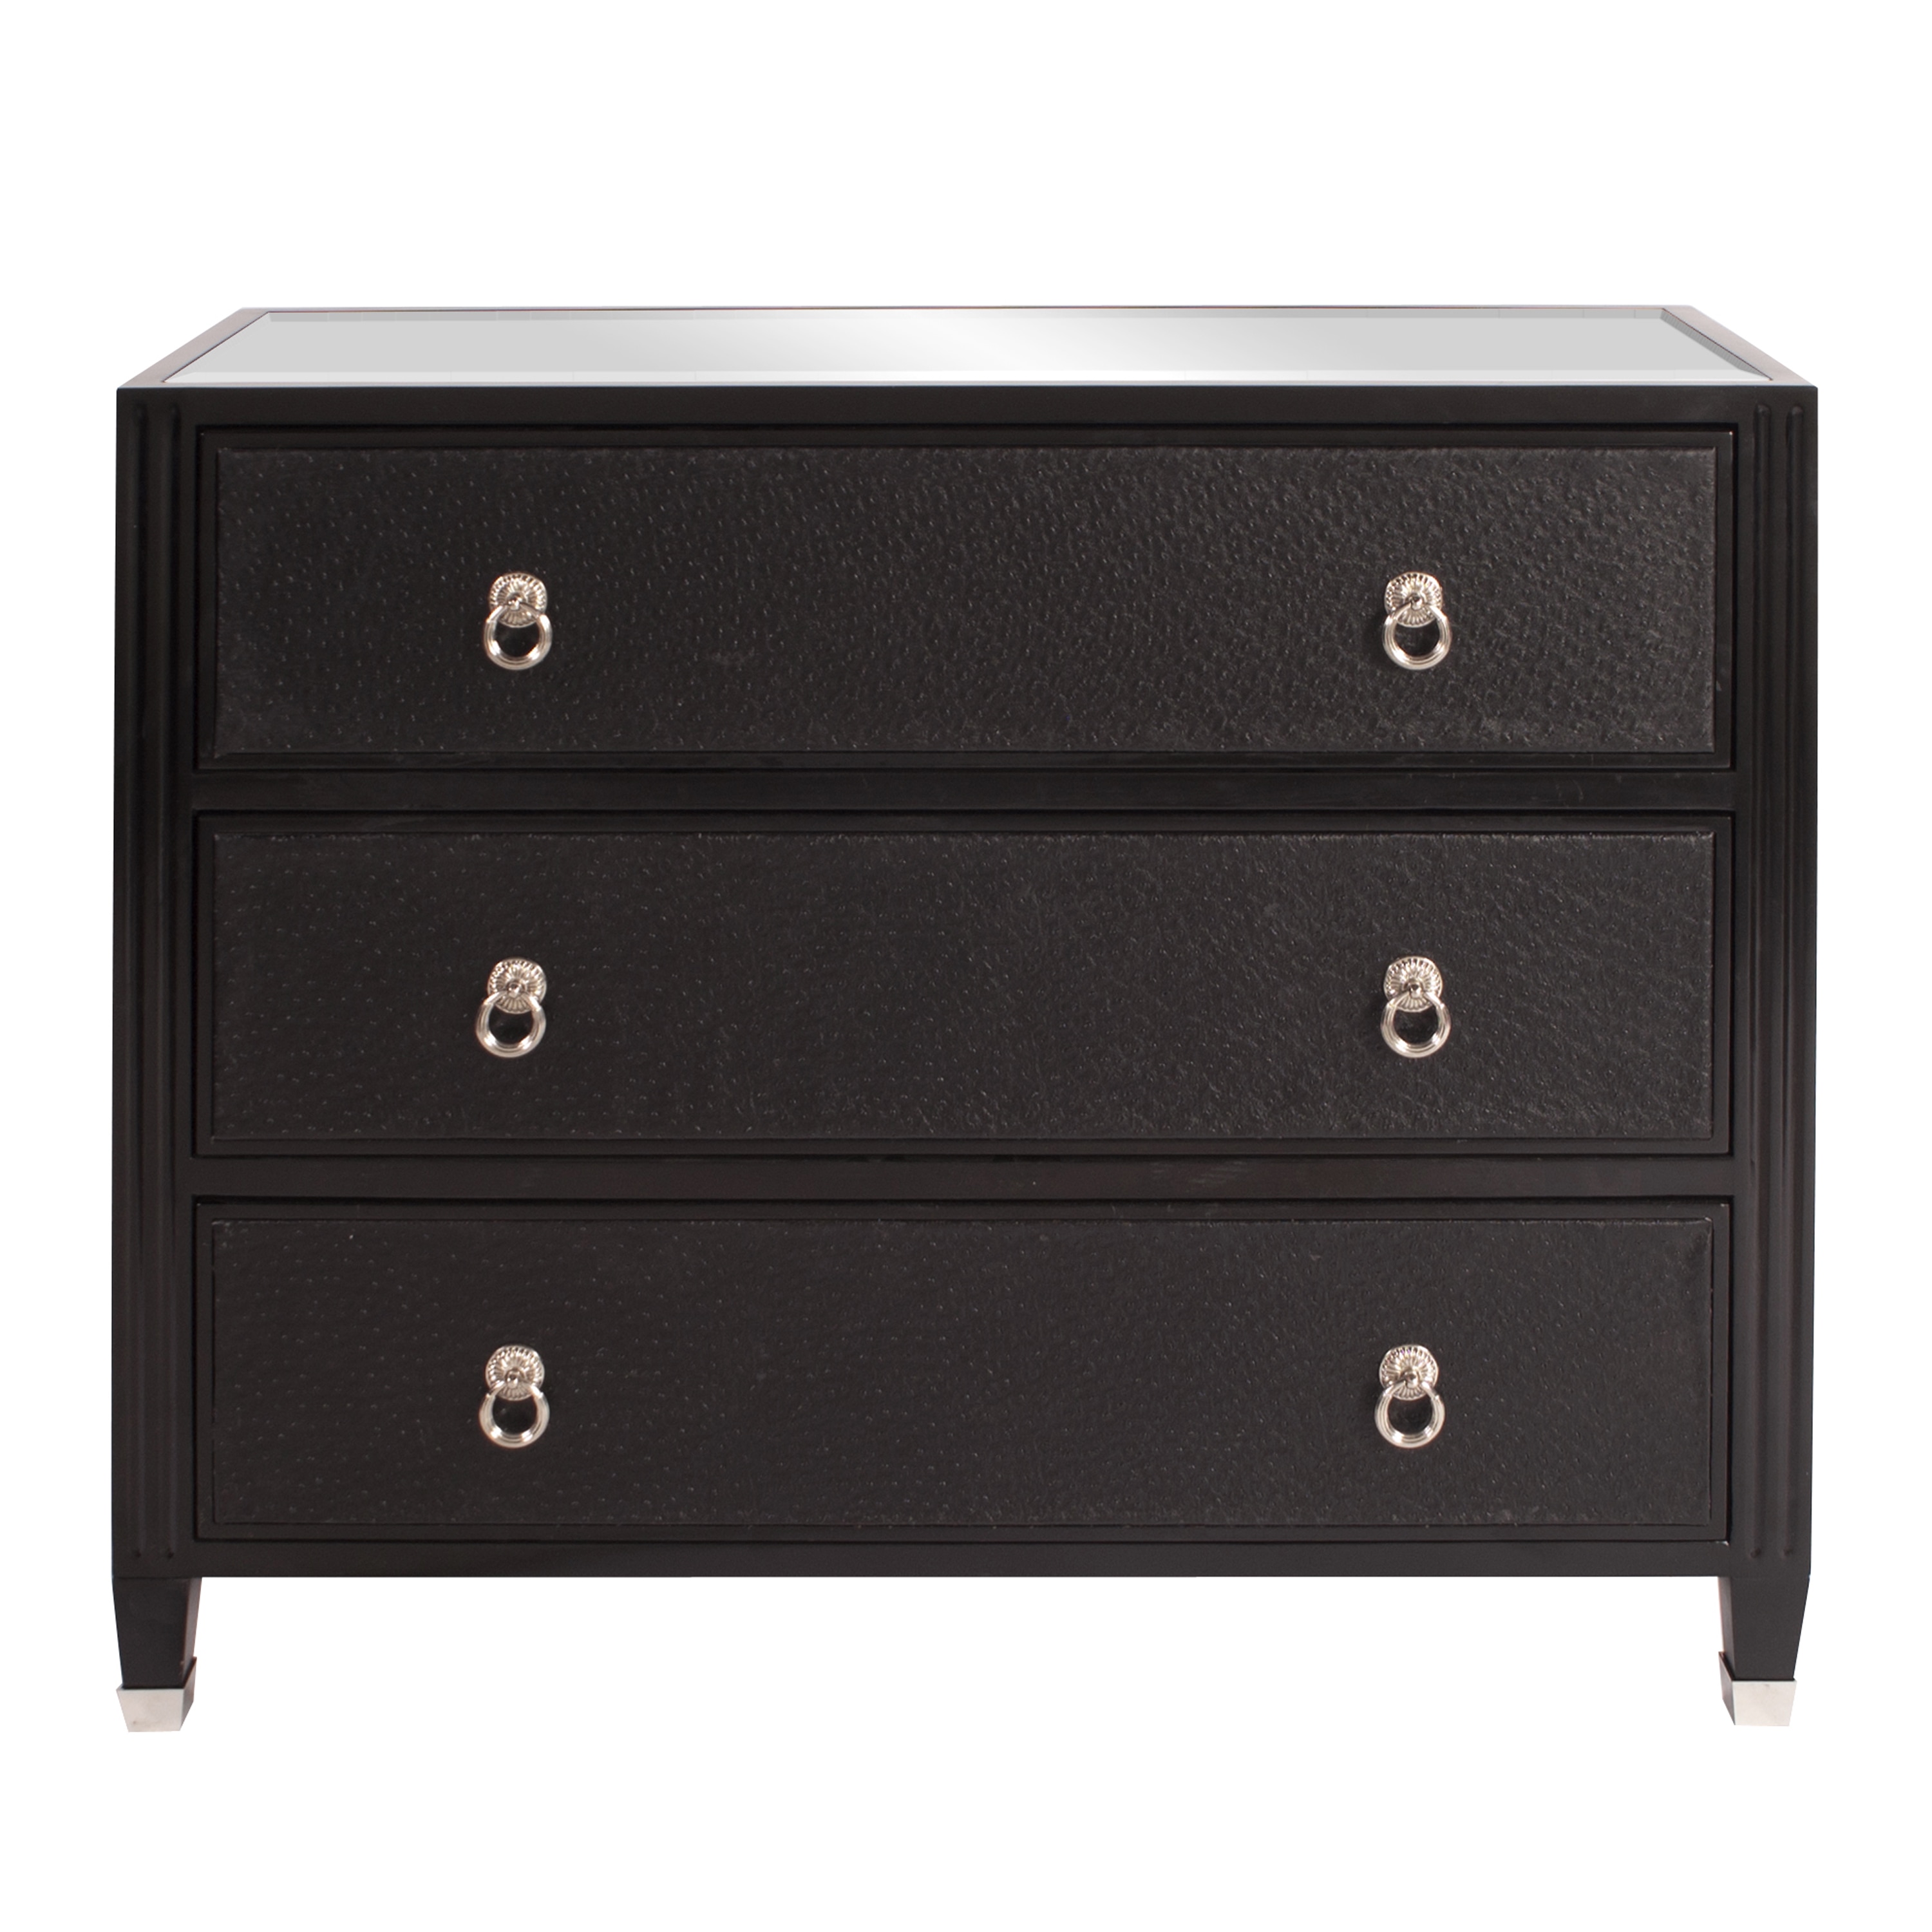 Shop Black Faux Leather Dresser With Mirrored Top Overstock